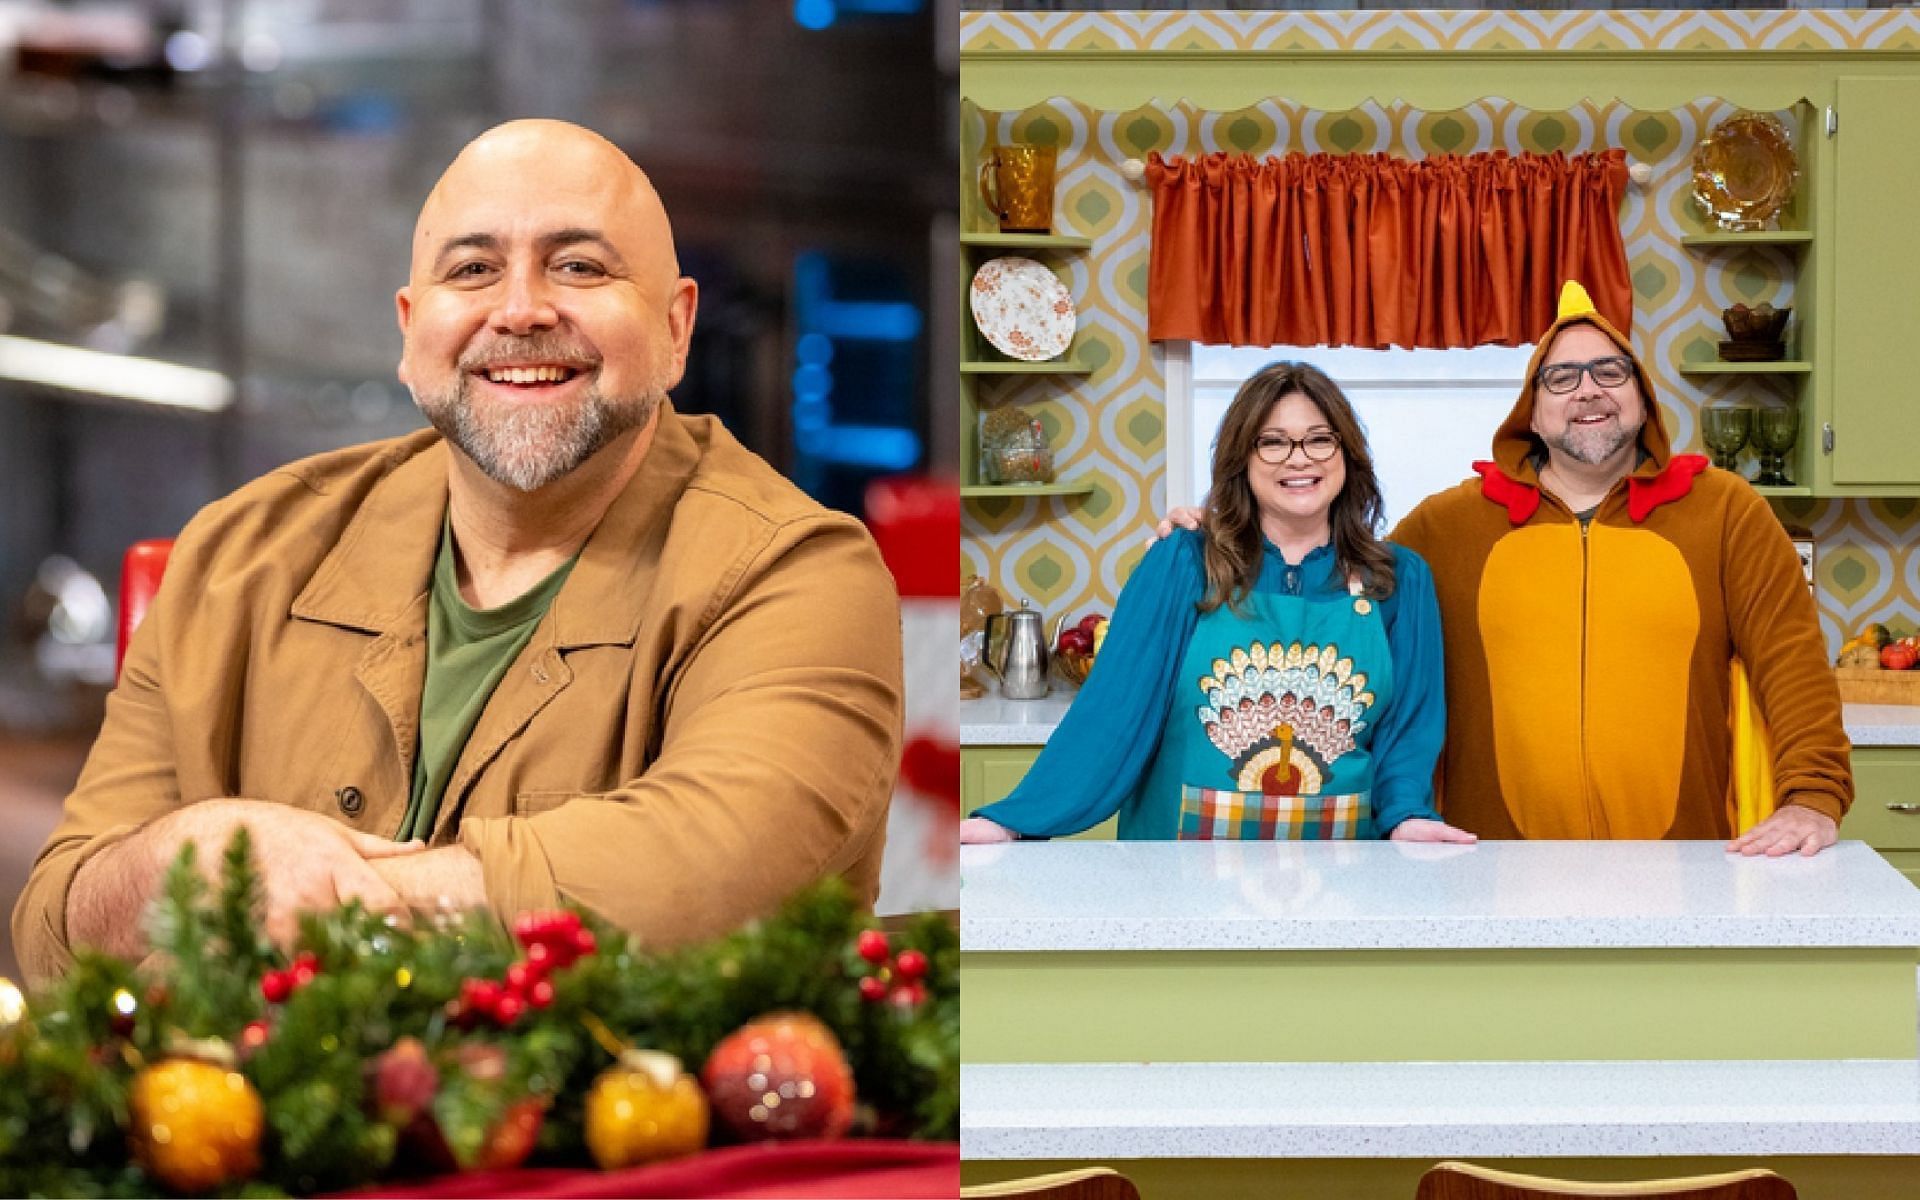 What is chef Duff Goldman known for? Identity explored as he prepares